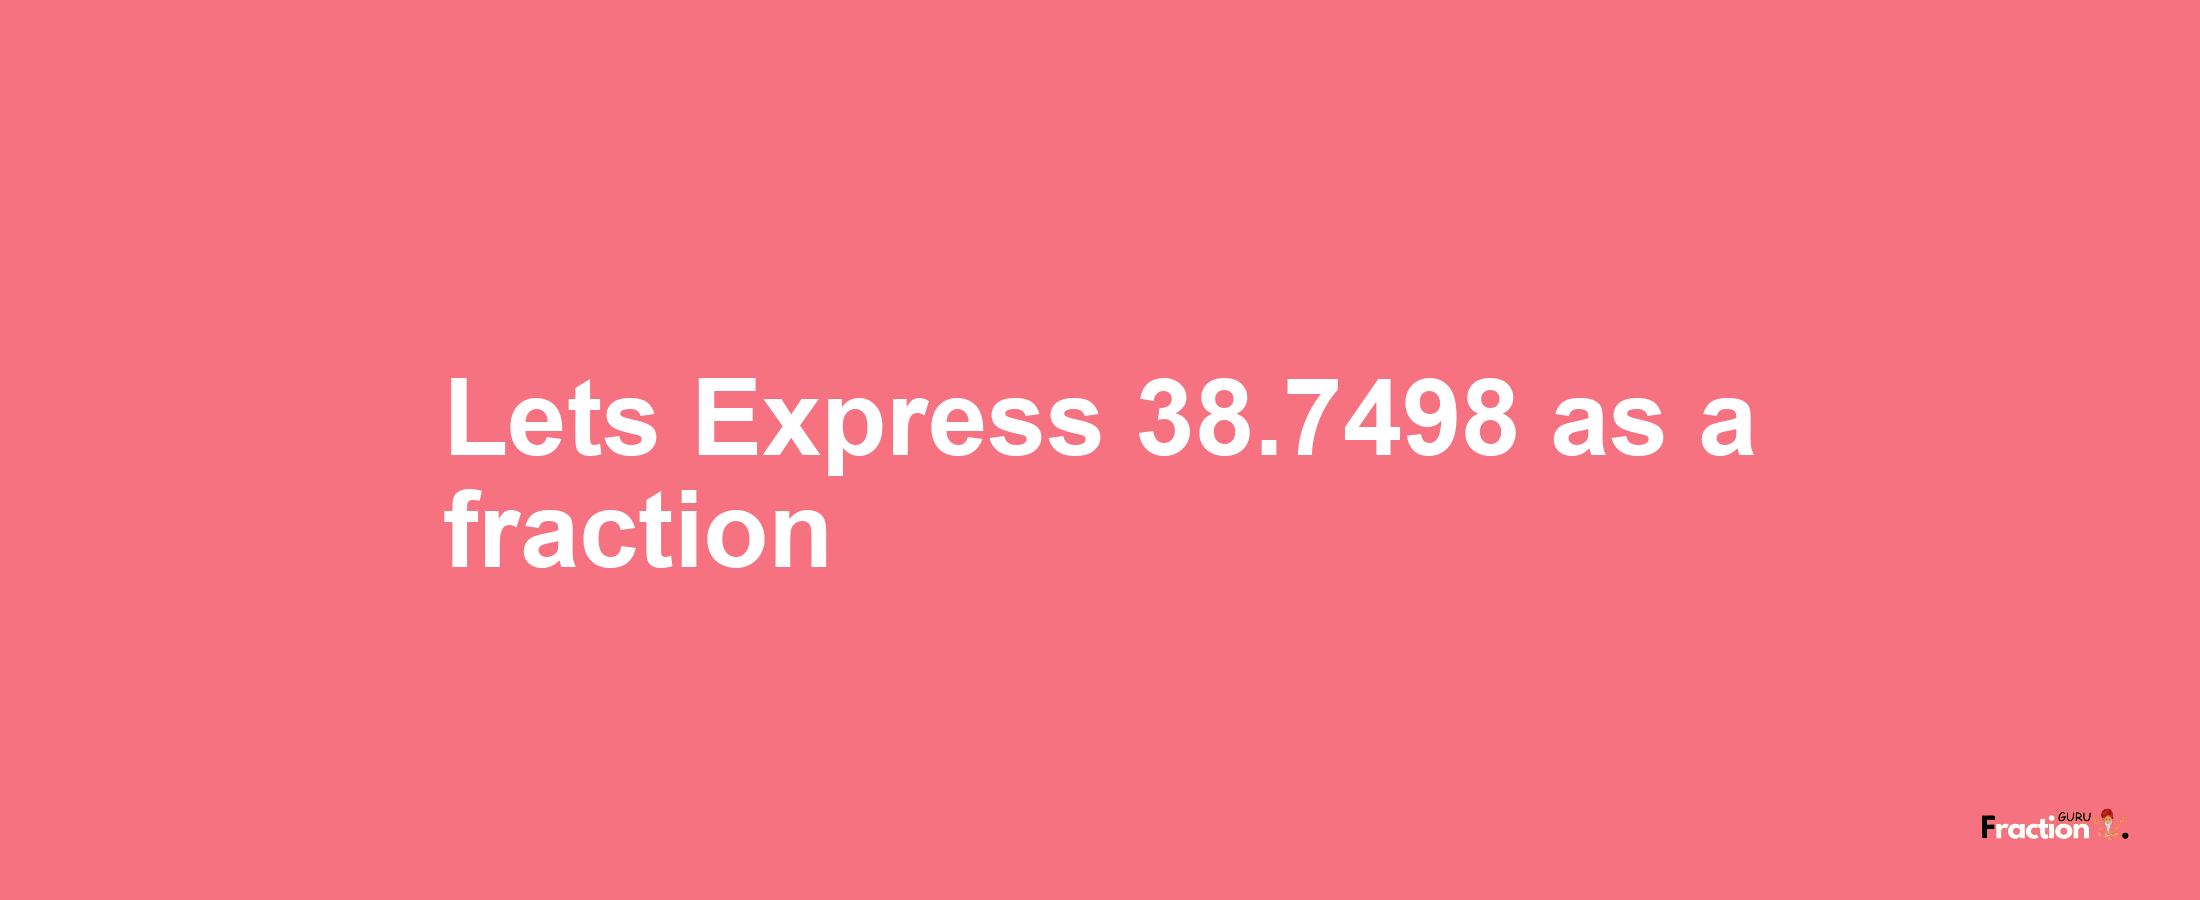 Lets Express 38.7498 as afraction